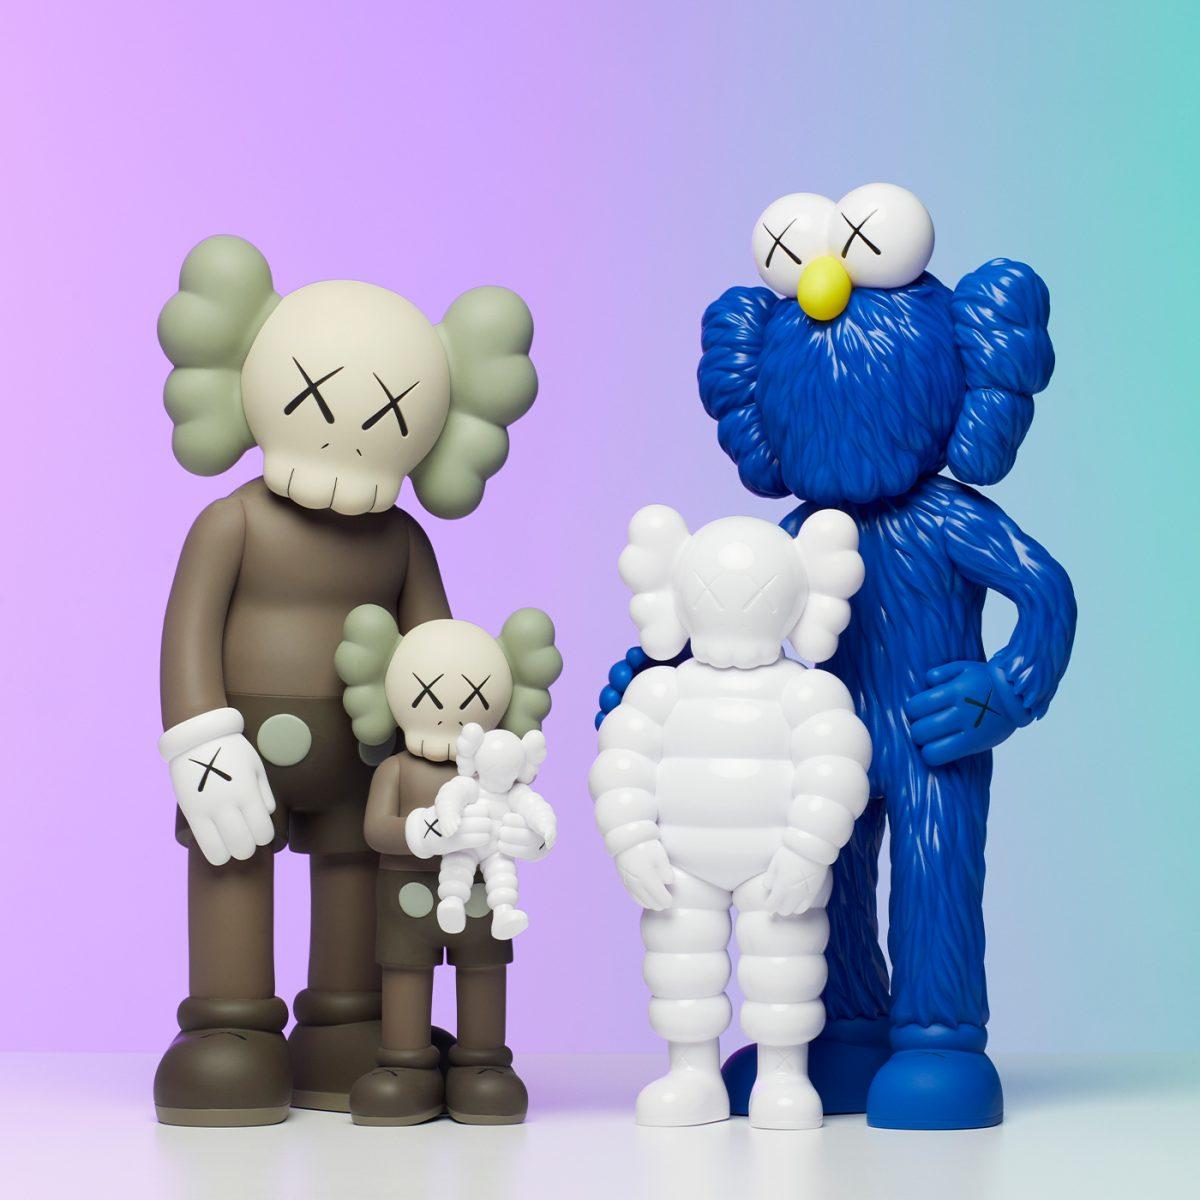 KAWS & Collectibles for All